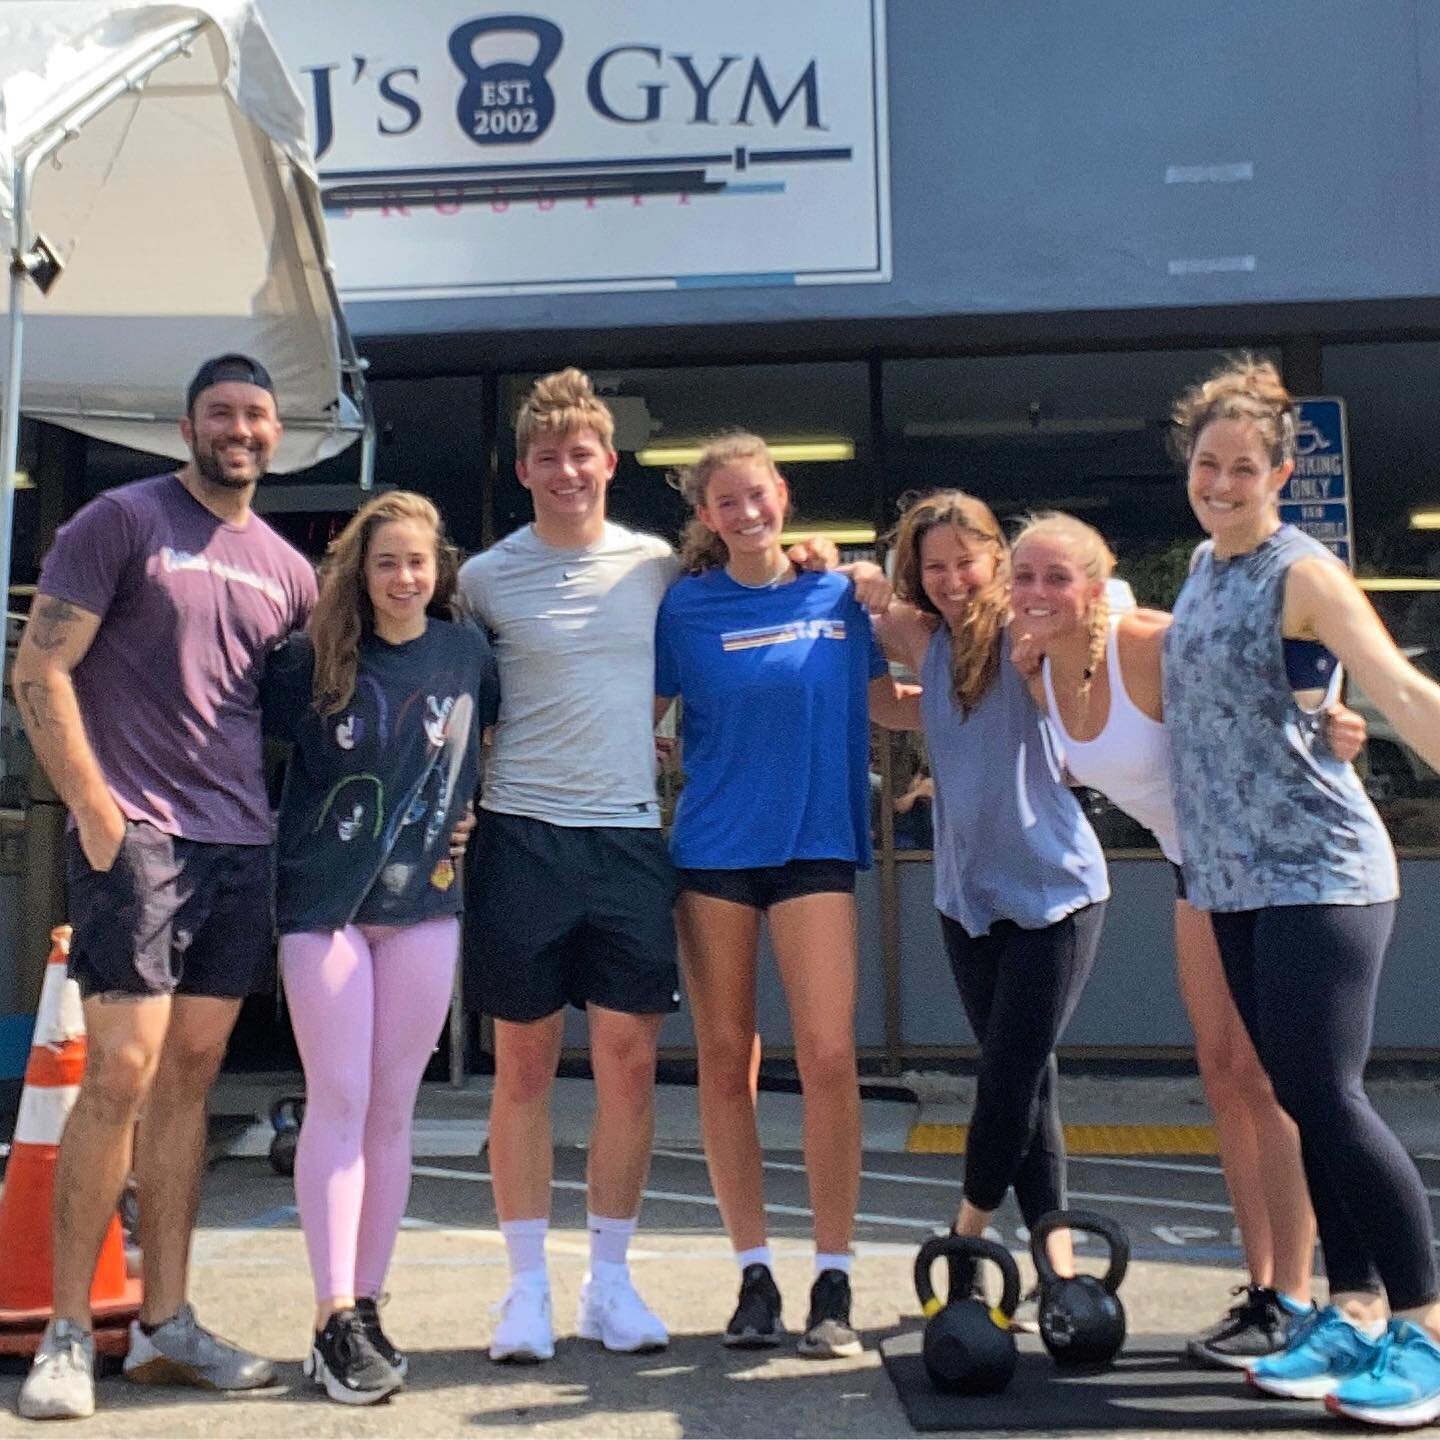 Birthday workout for our very own Coach Lyle (Monday) with these hardcore athletes. 

#tjsgym
#tjsgyms
#fitnessinmarin